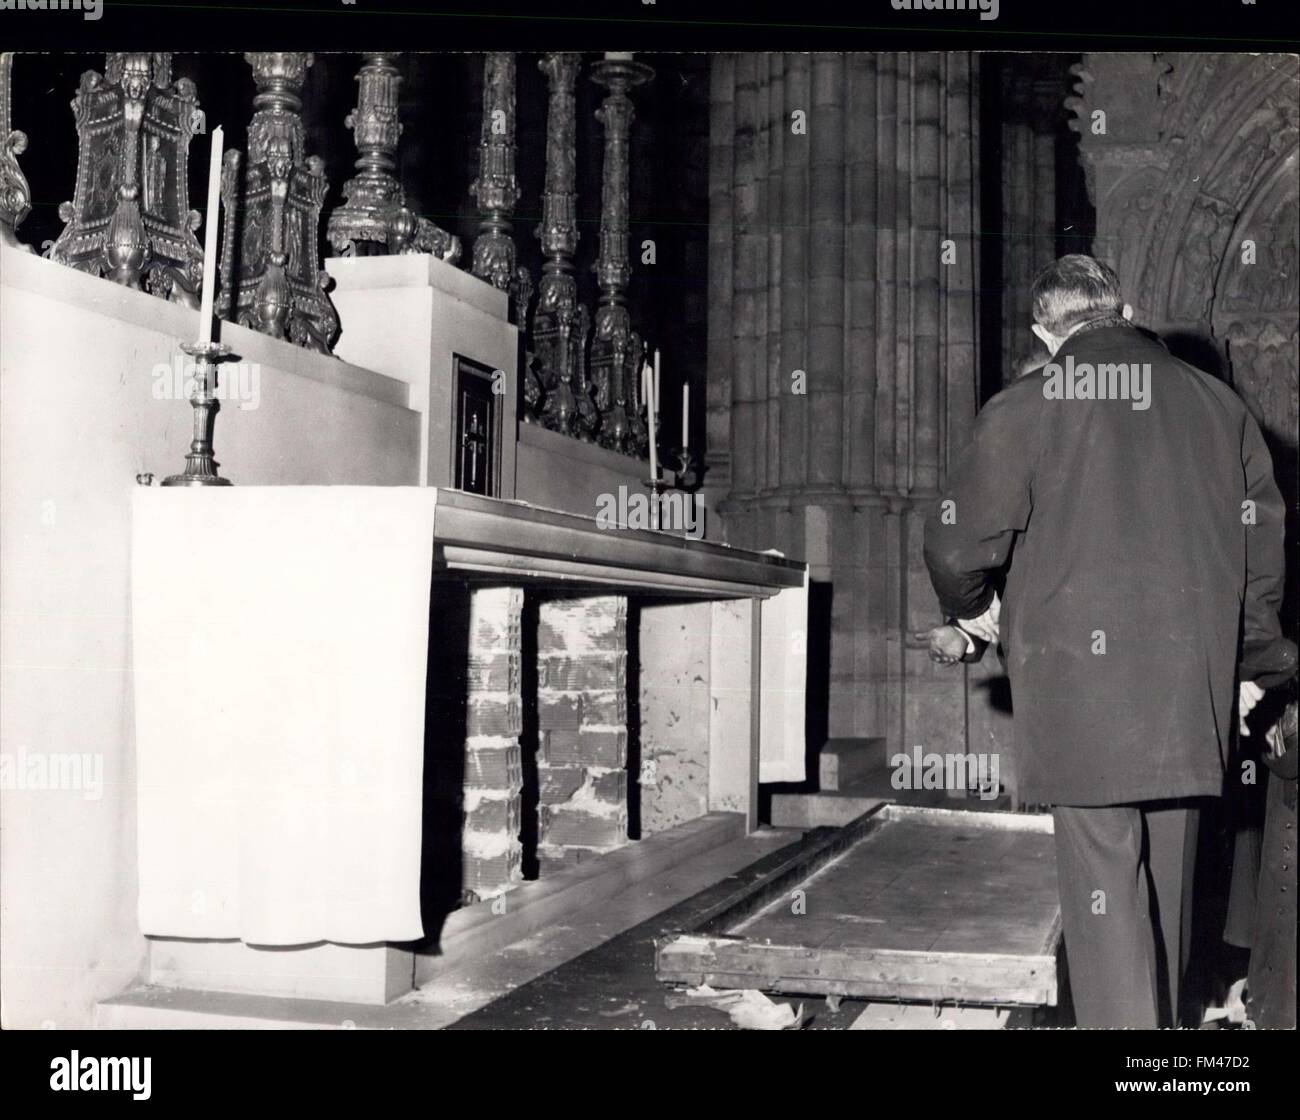 1959 - The Basilic Of Saint-Denis Robbed: This night in Paris, robbers entered the basilic od Saint-Denys, One of the noblest monuments of the French Capital, they stole a bas-relief from the altar. Photo shows The altar from which the bas-relief was detached. © Keystone Pictures USA/ZUMAPRESS.com/Alamy Live News Stock Photo